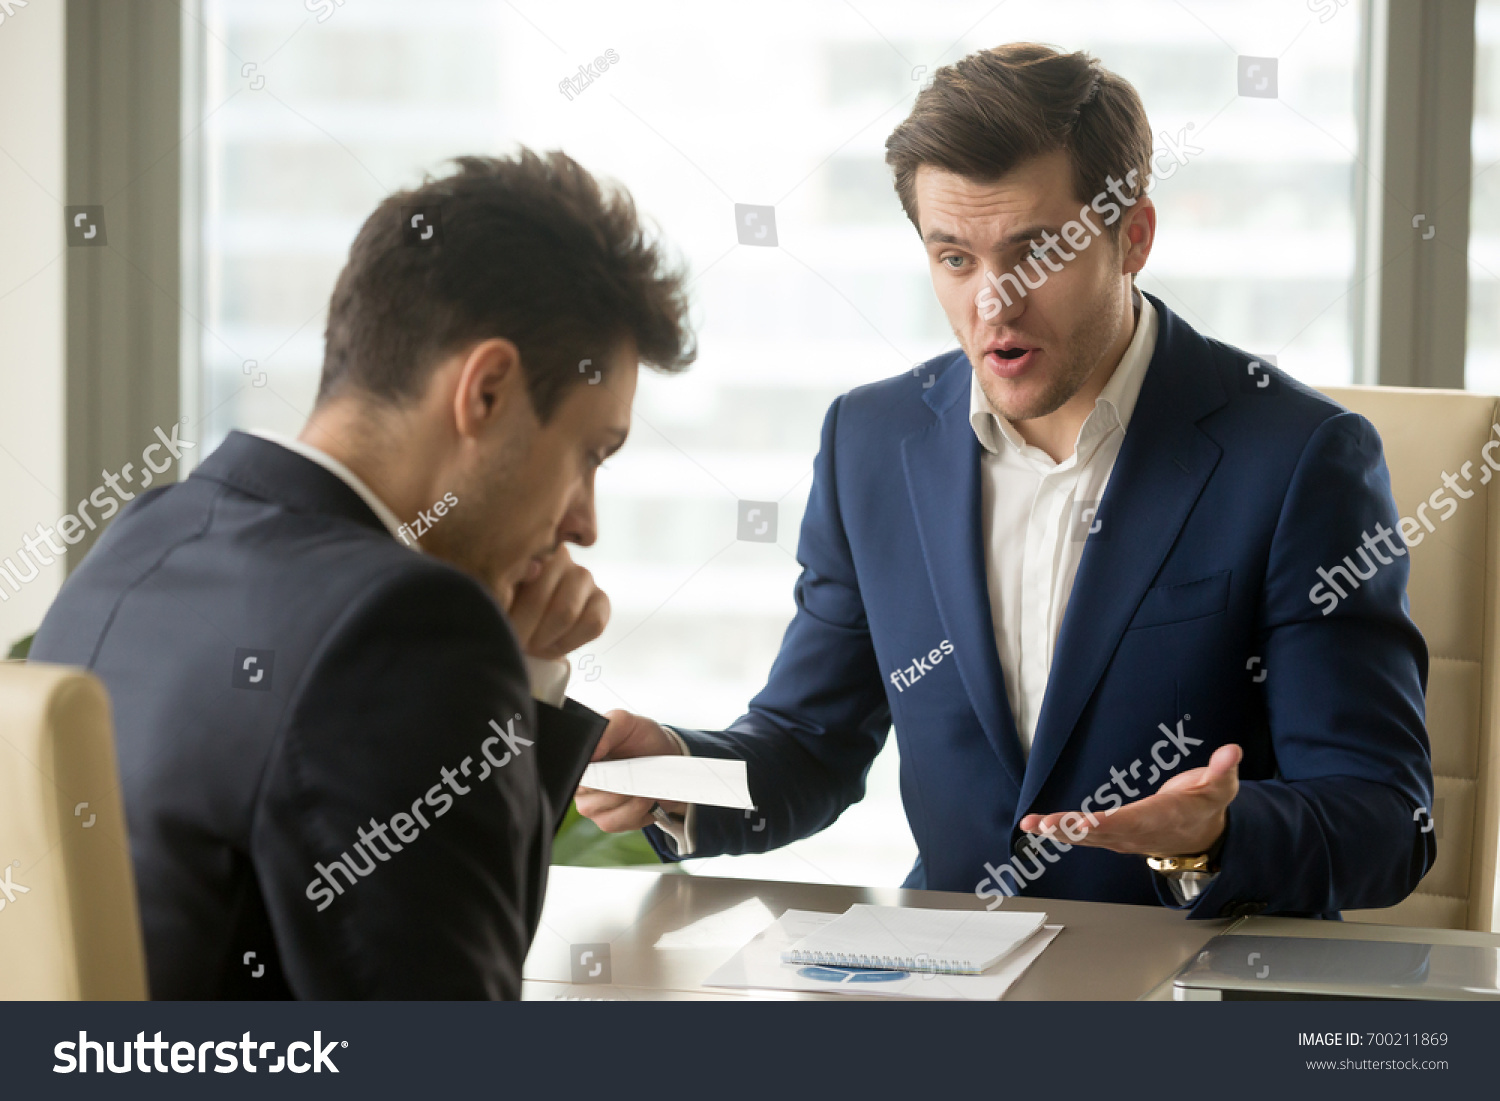 Angry mean boss yelling at employee for missing deadline, executive manager scolding ineffective salesman showing bad work results, firing worker for failure, team leader dissatisfied with report #700211869